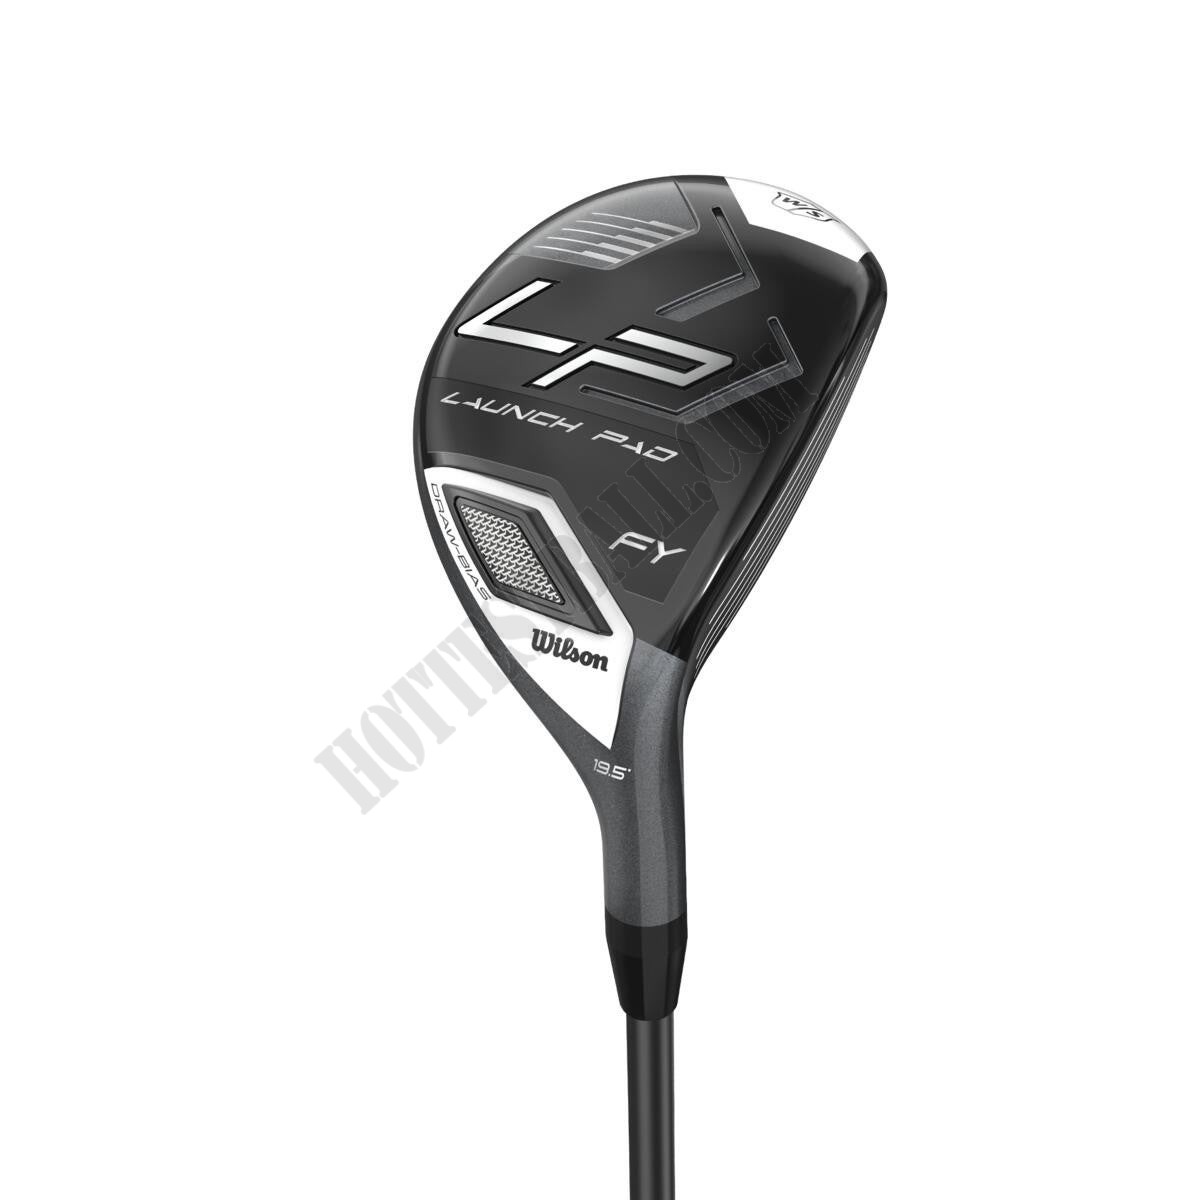 Launch Pad FY Club Hybrids - Wilson Discount Store - -0